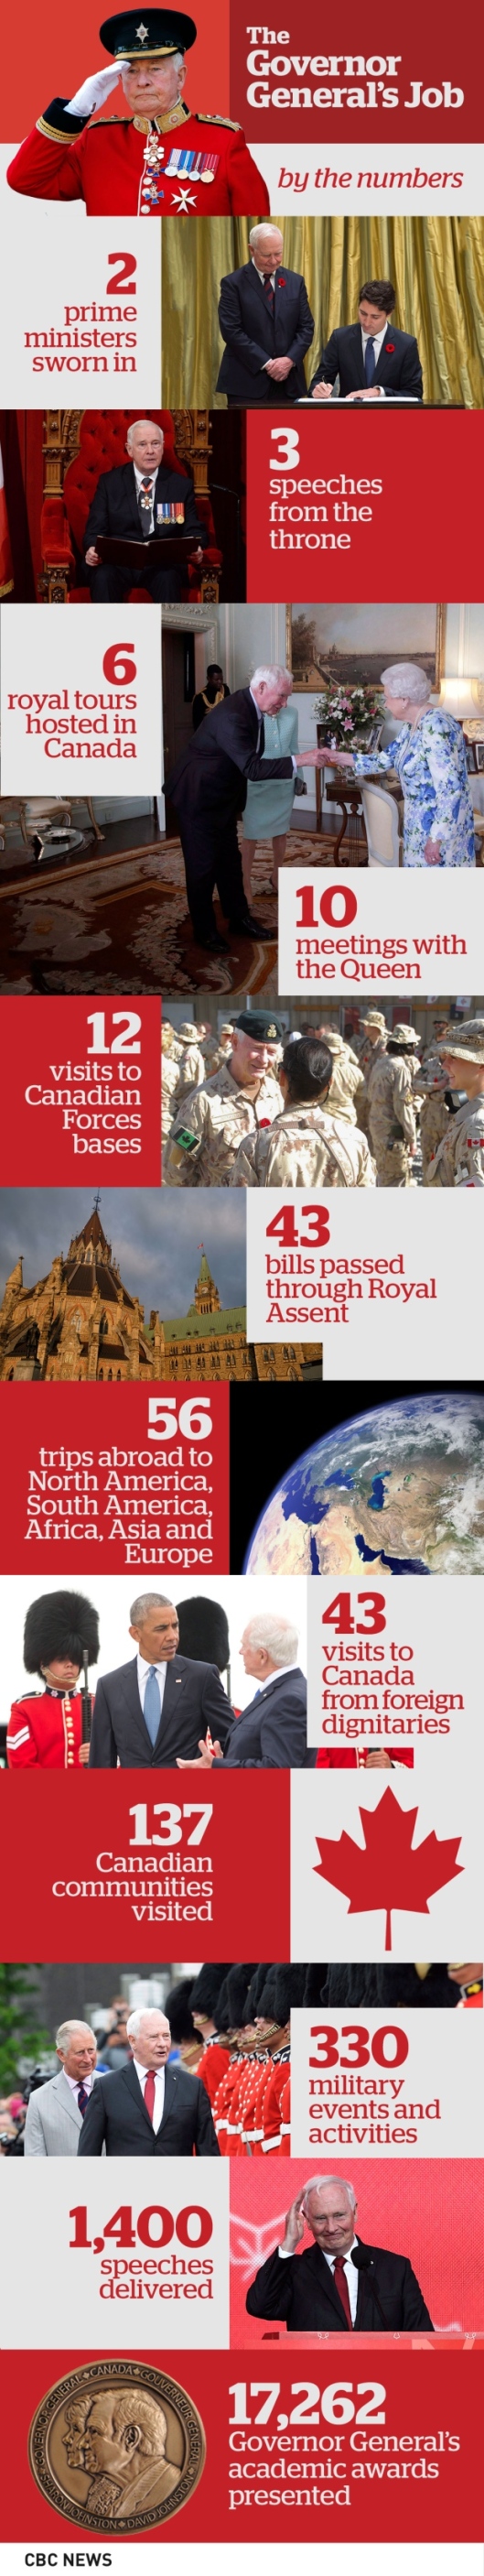 governor-general-s-job-by-the-numbers.jpg